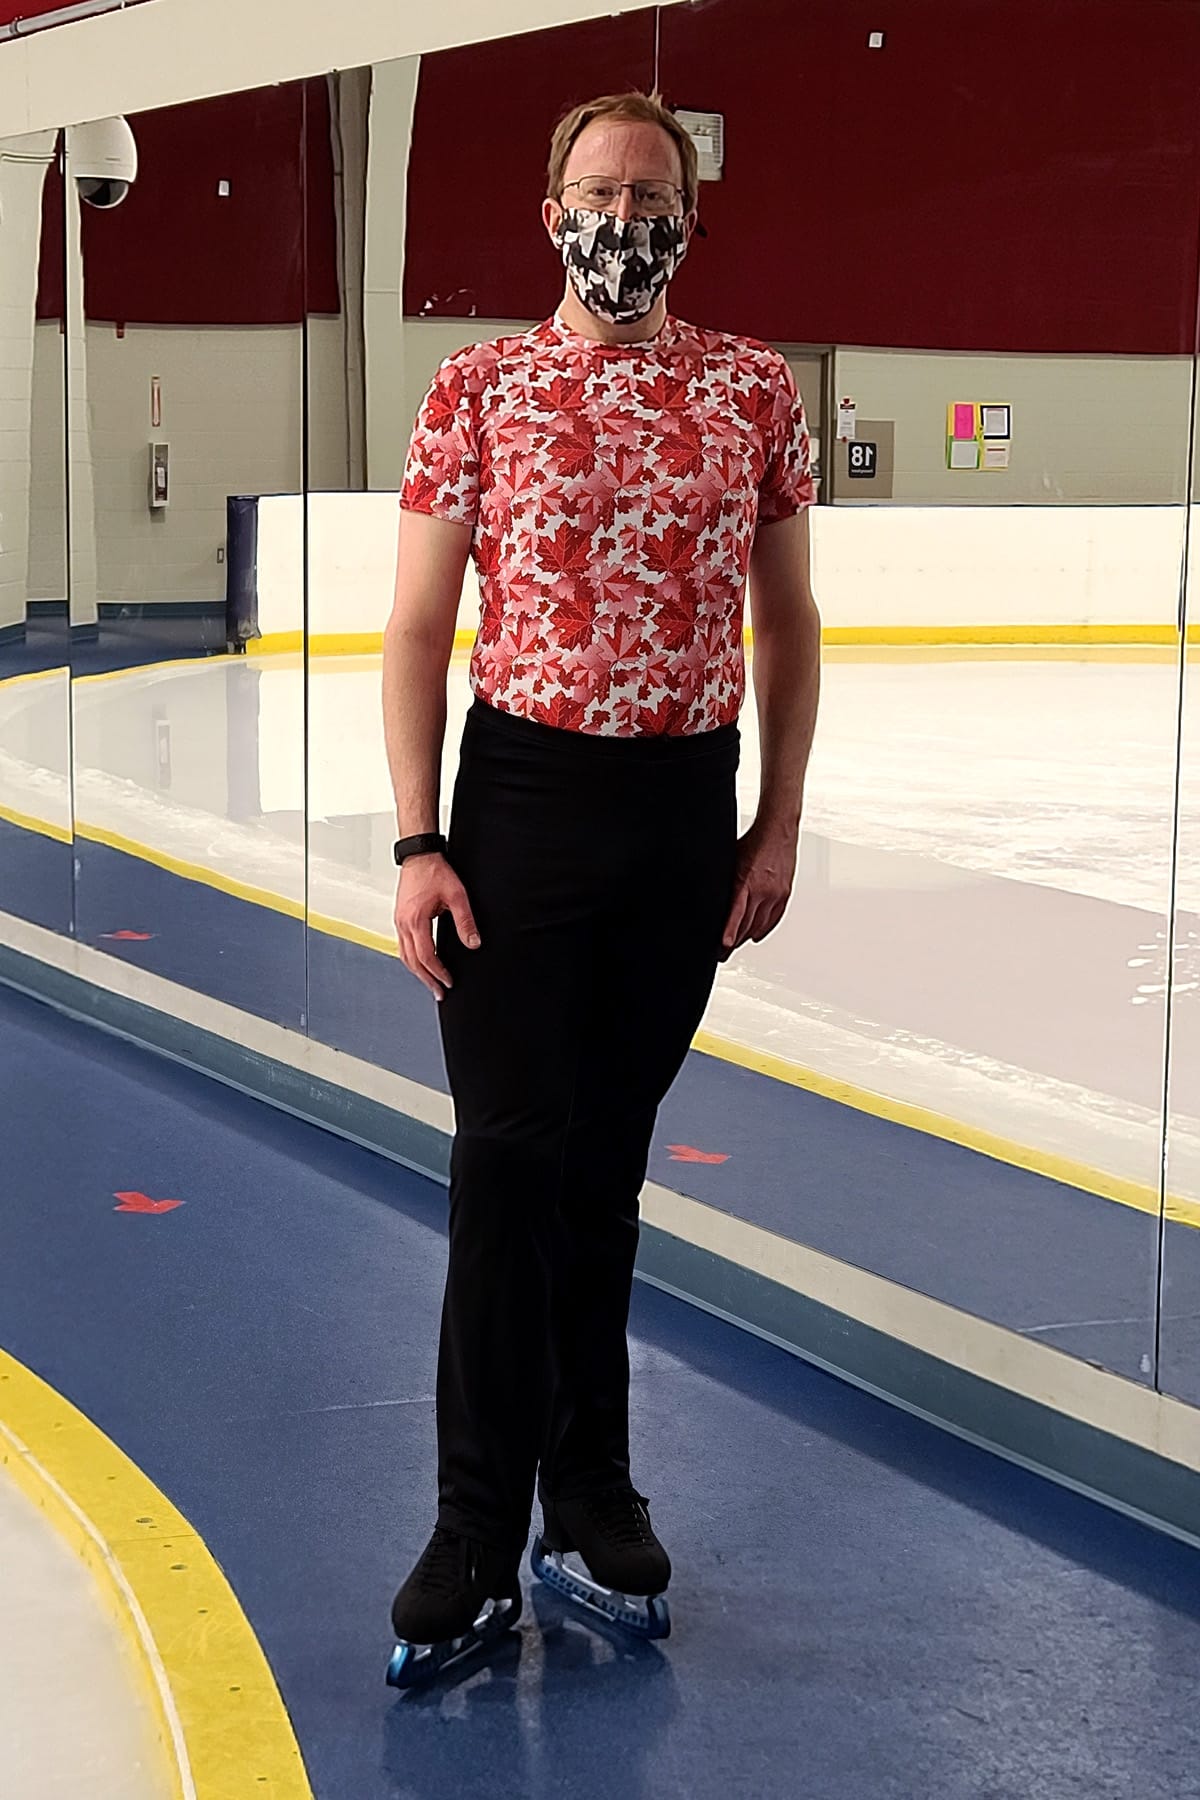 A middle aged man standing at the side of a skating rink, wearing a red and white body shirt with black skating pants.